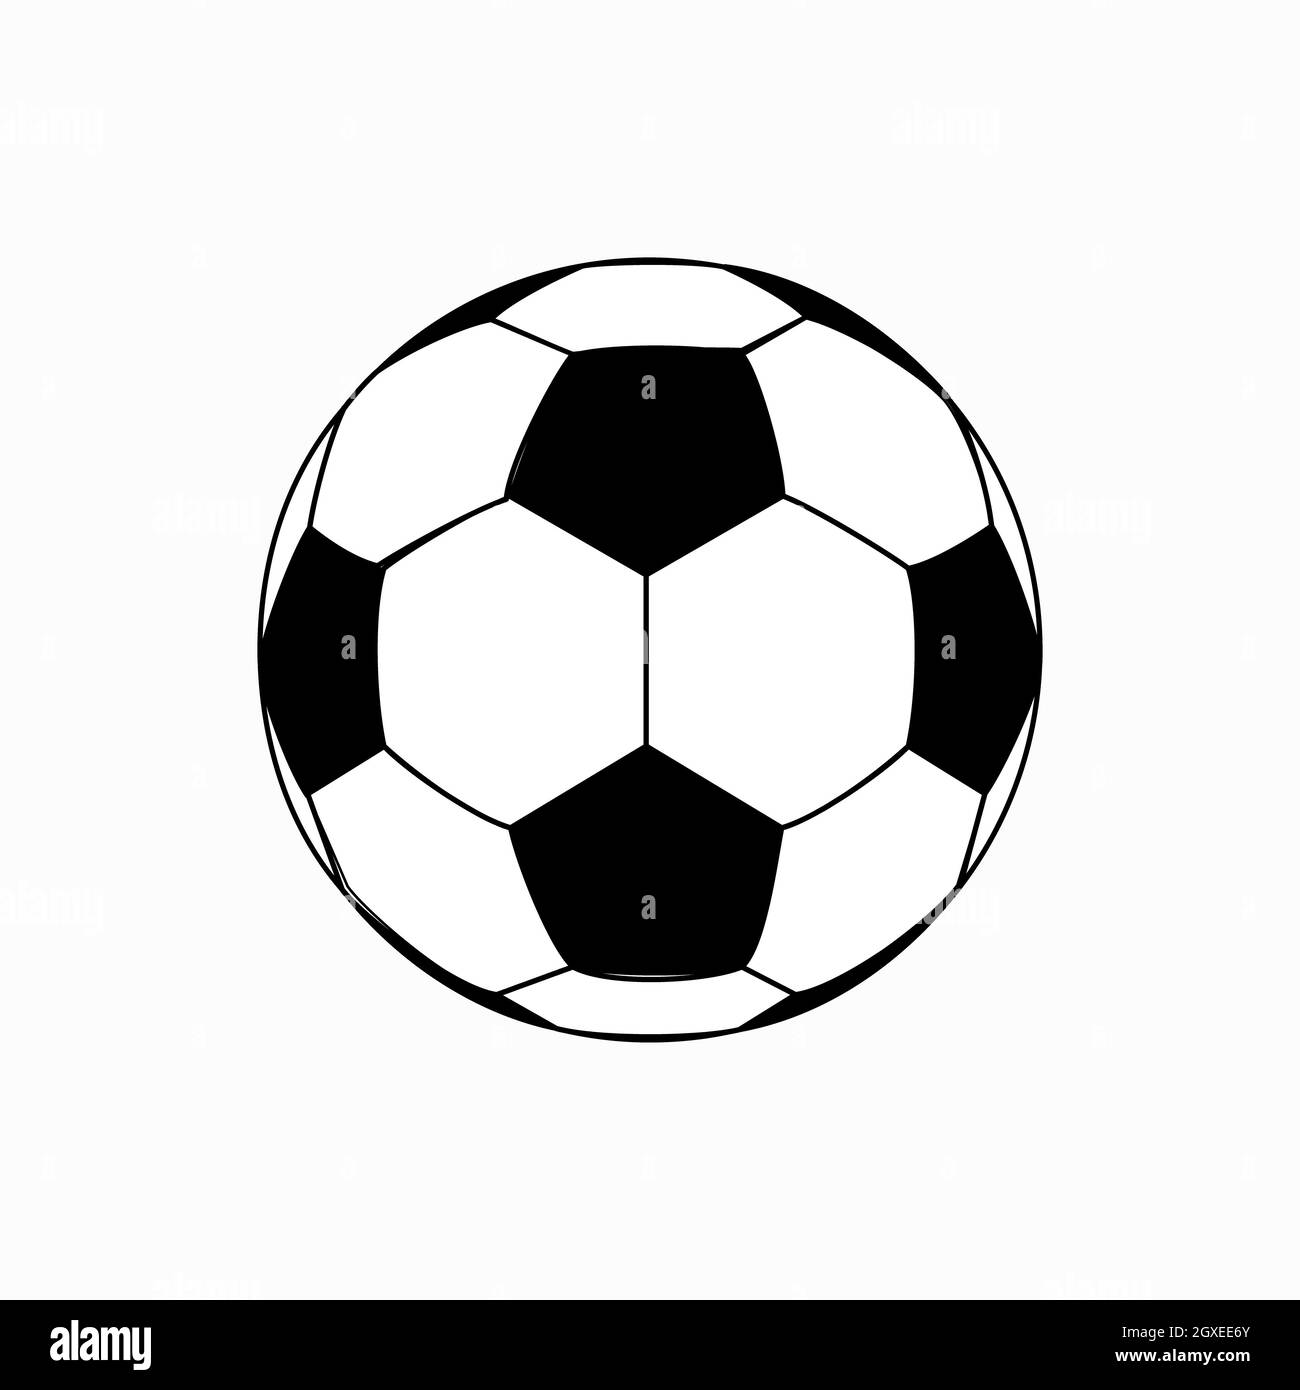 Soccer ball icon in isometric 3d style isolated on white background Stock Photo